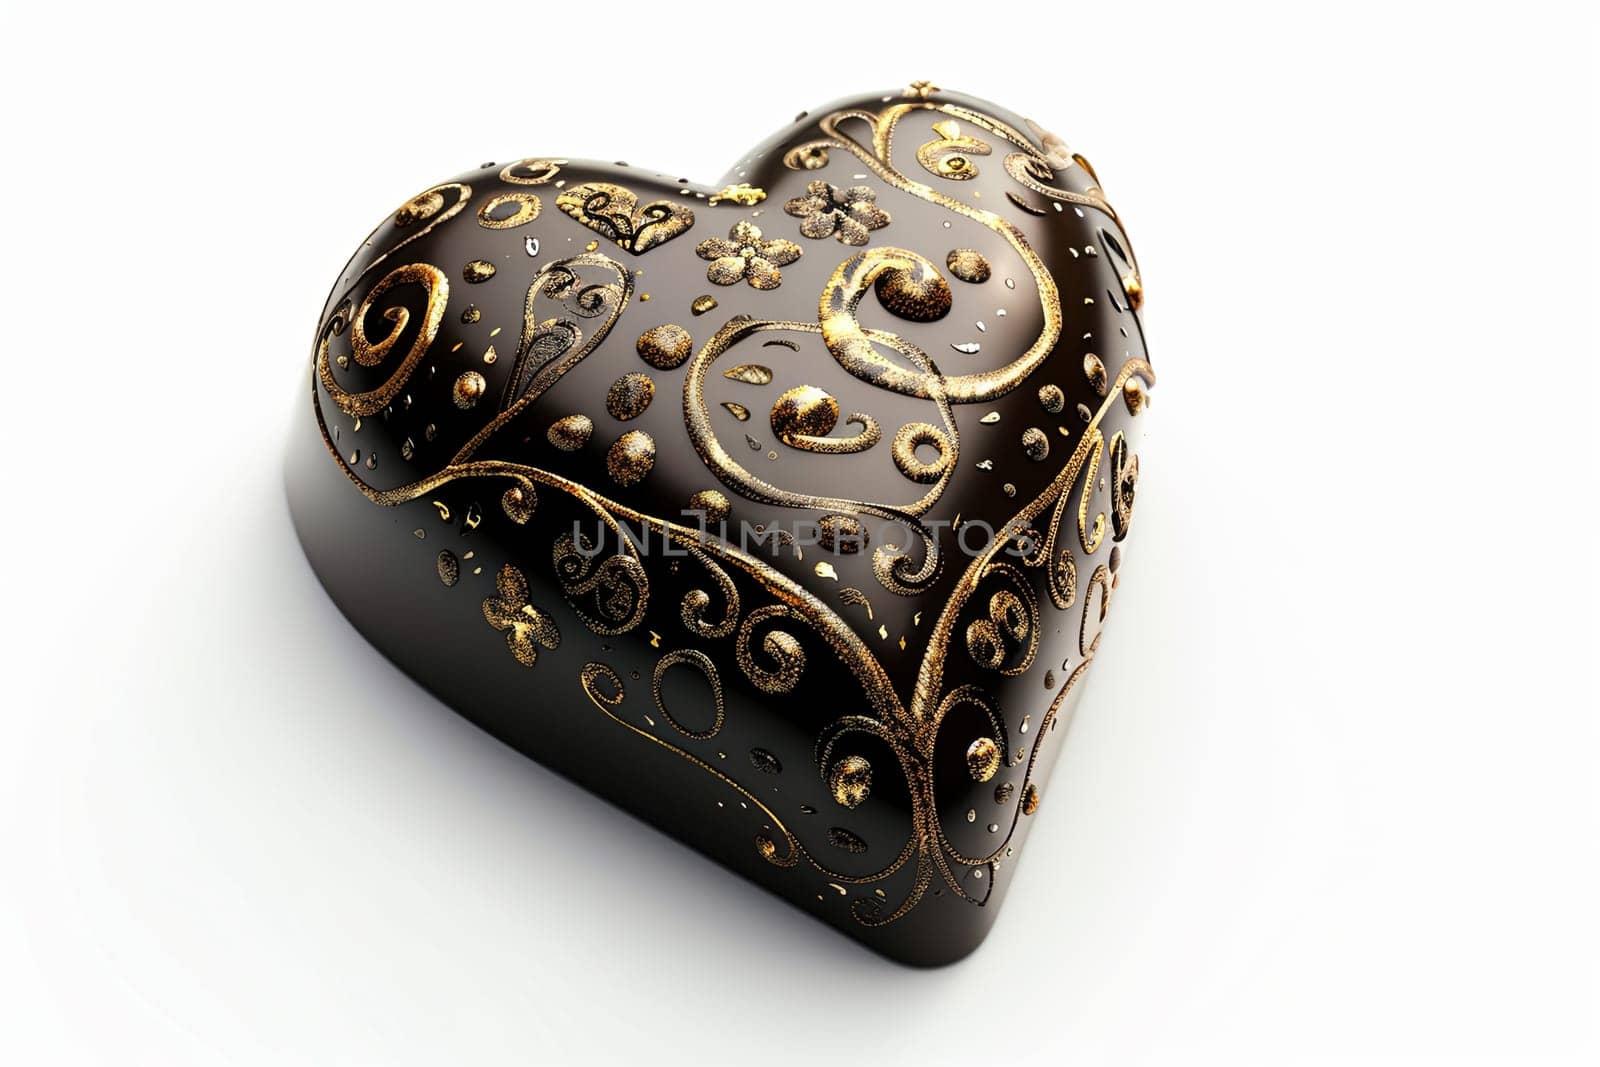 A heart shaped box adorned with golden accents, against a white backdrop, showcasing intricate details, exuding elegance and romance.